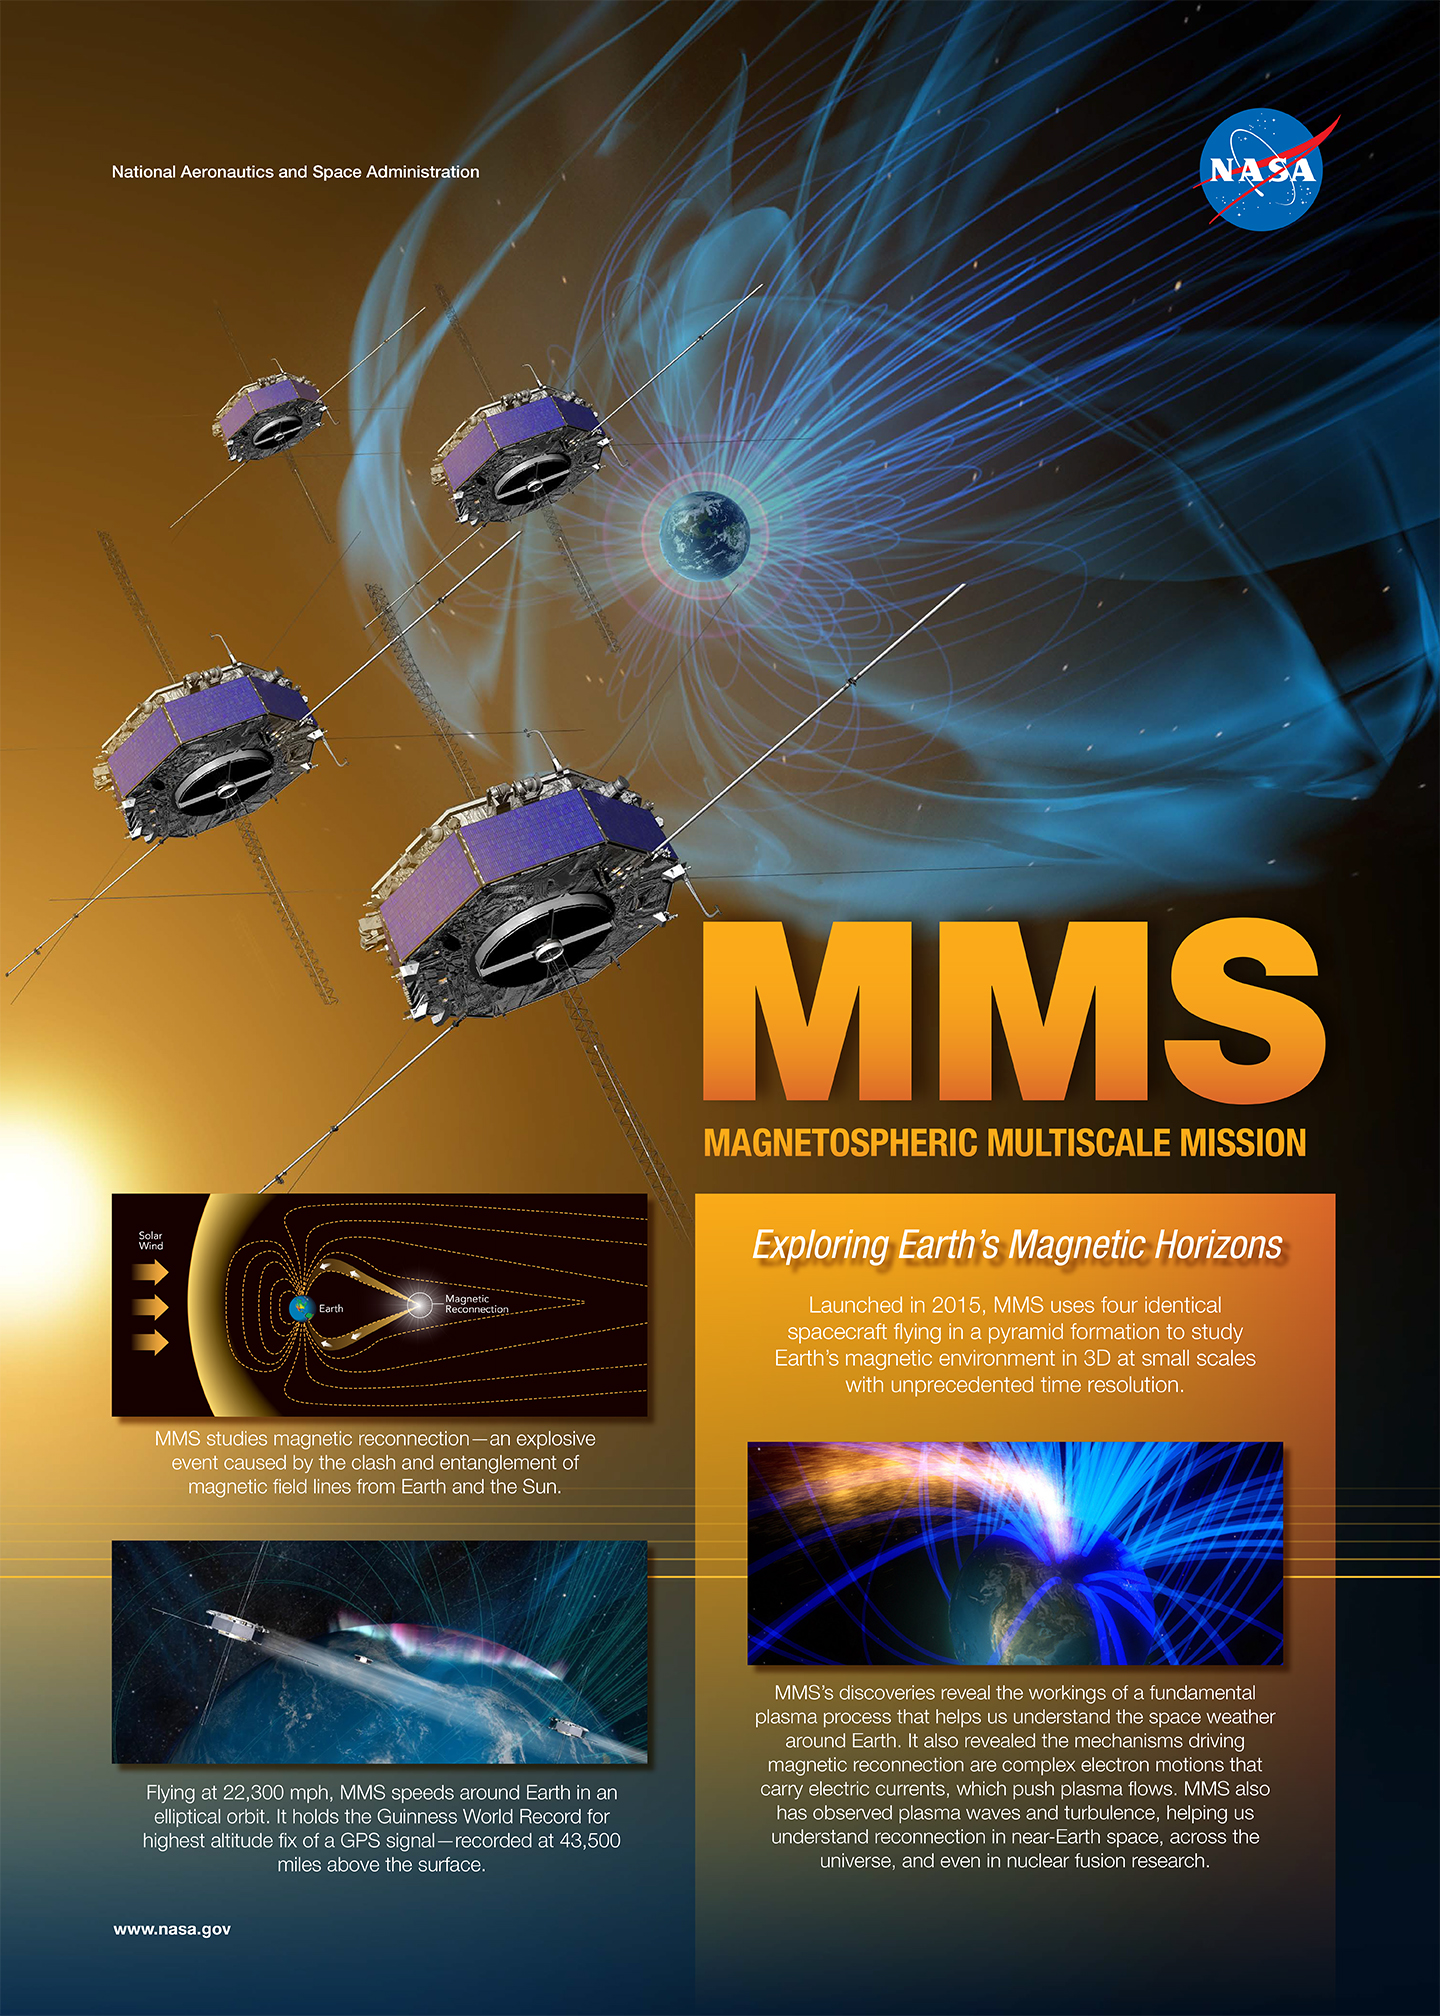 Infographic on NASA’s Magnetospheric Multiscale mission.